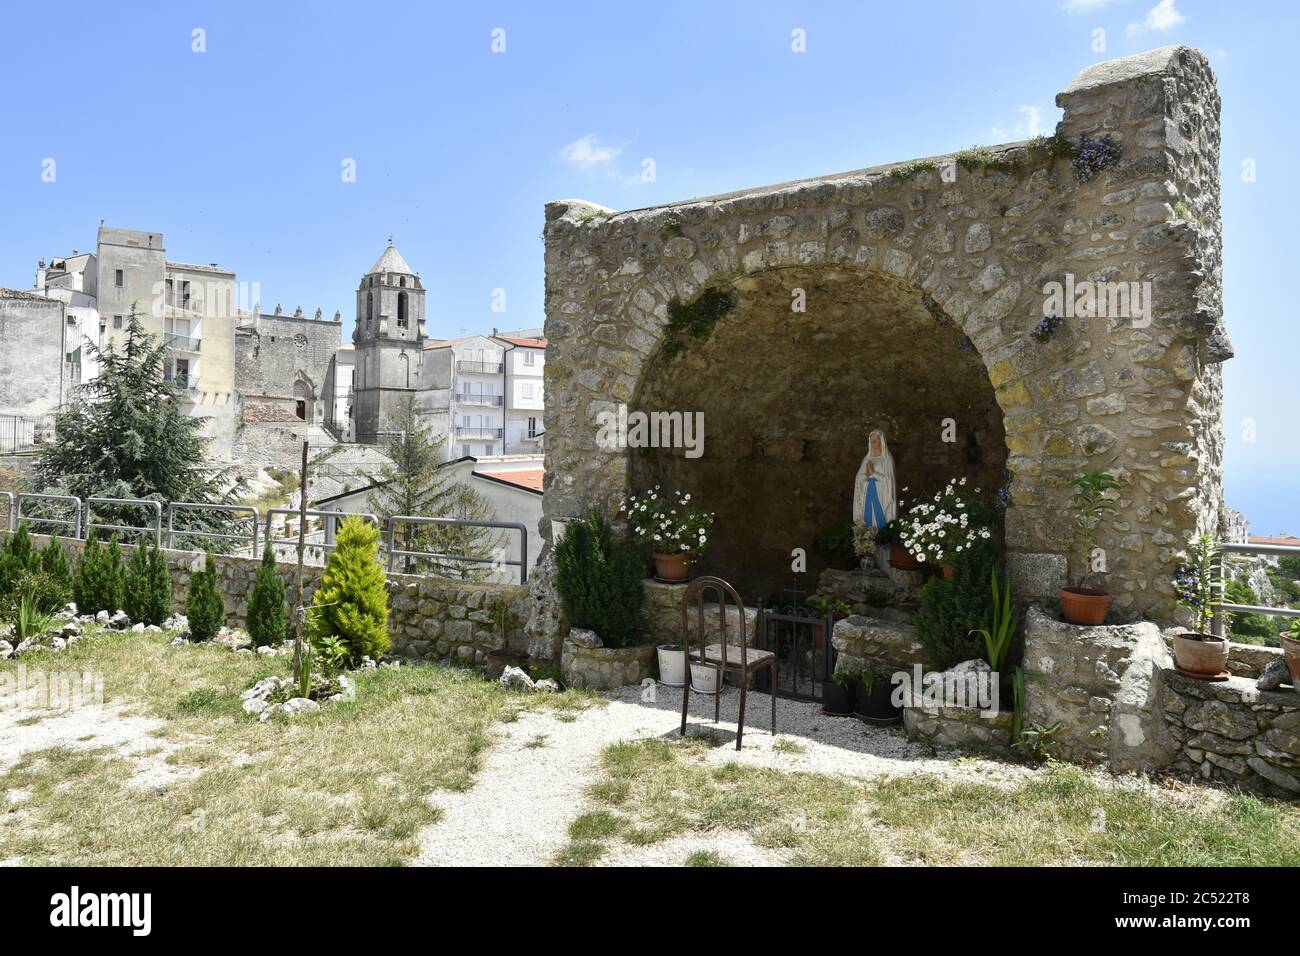 Panoramic view of the old town of Monte Sant'Angelo, Italy. Stock Photo